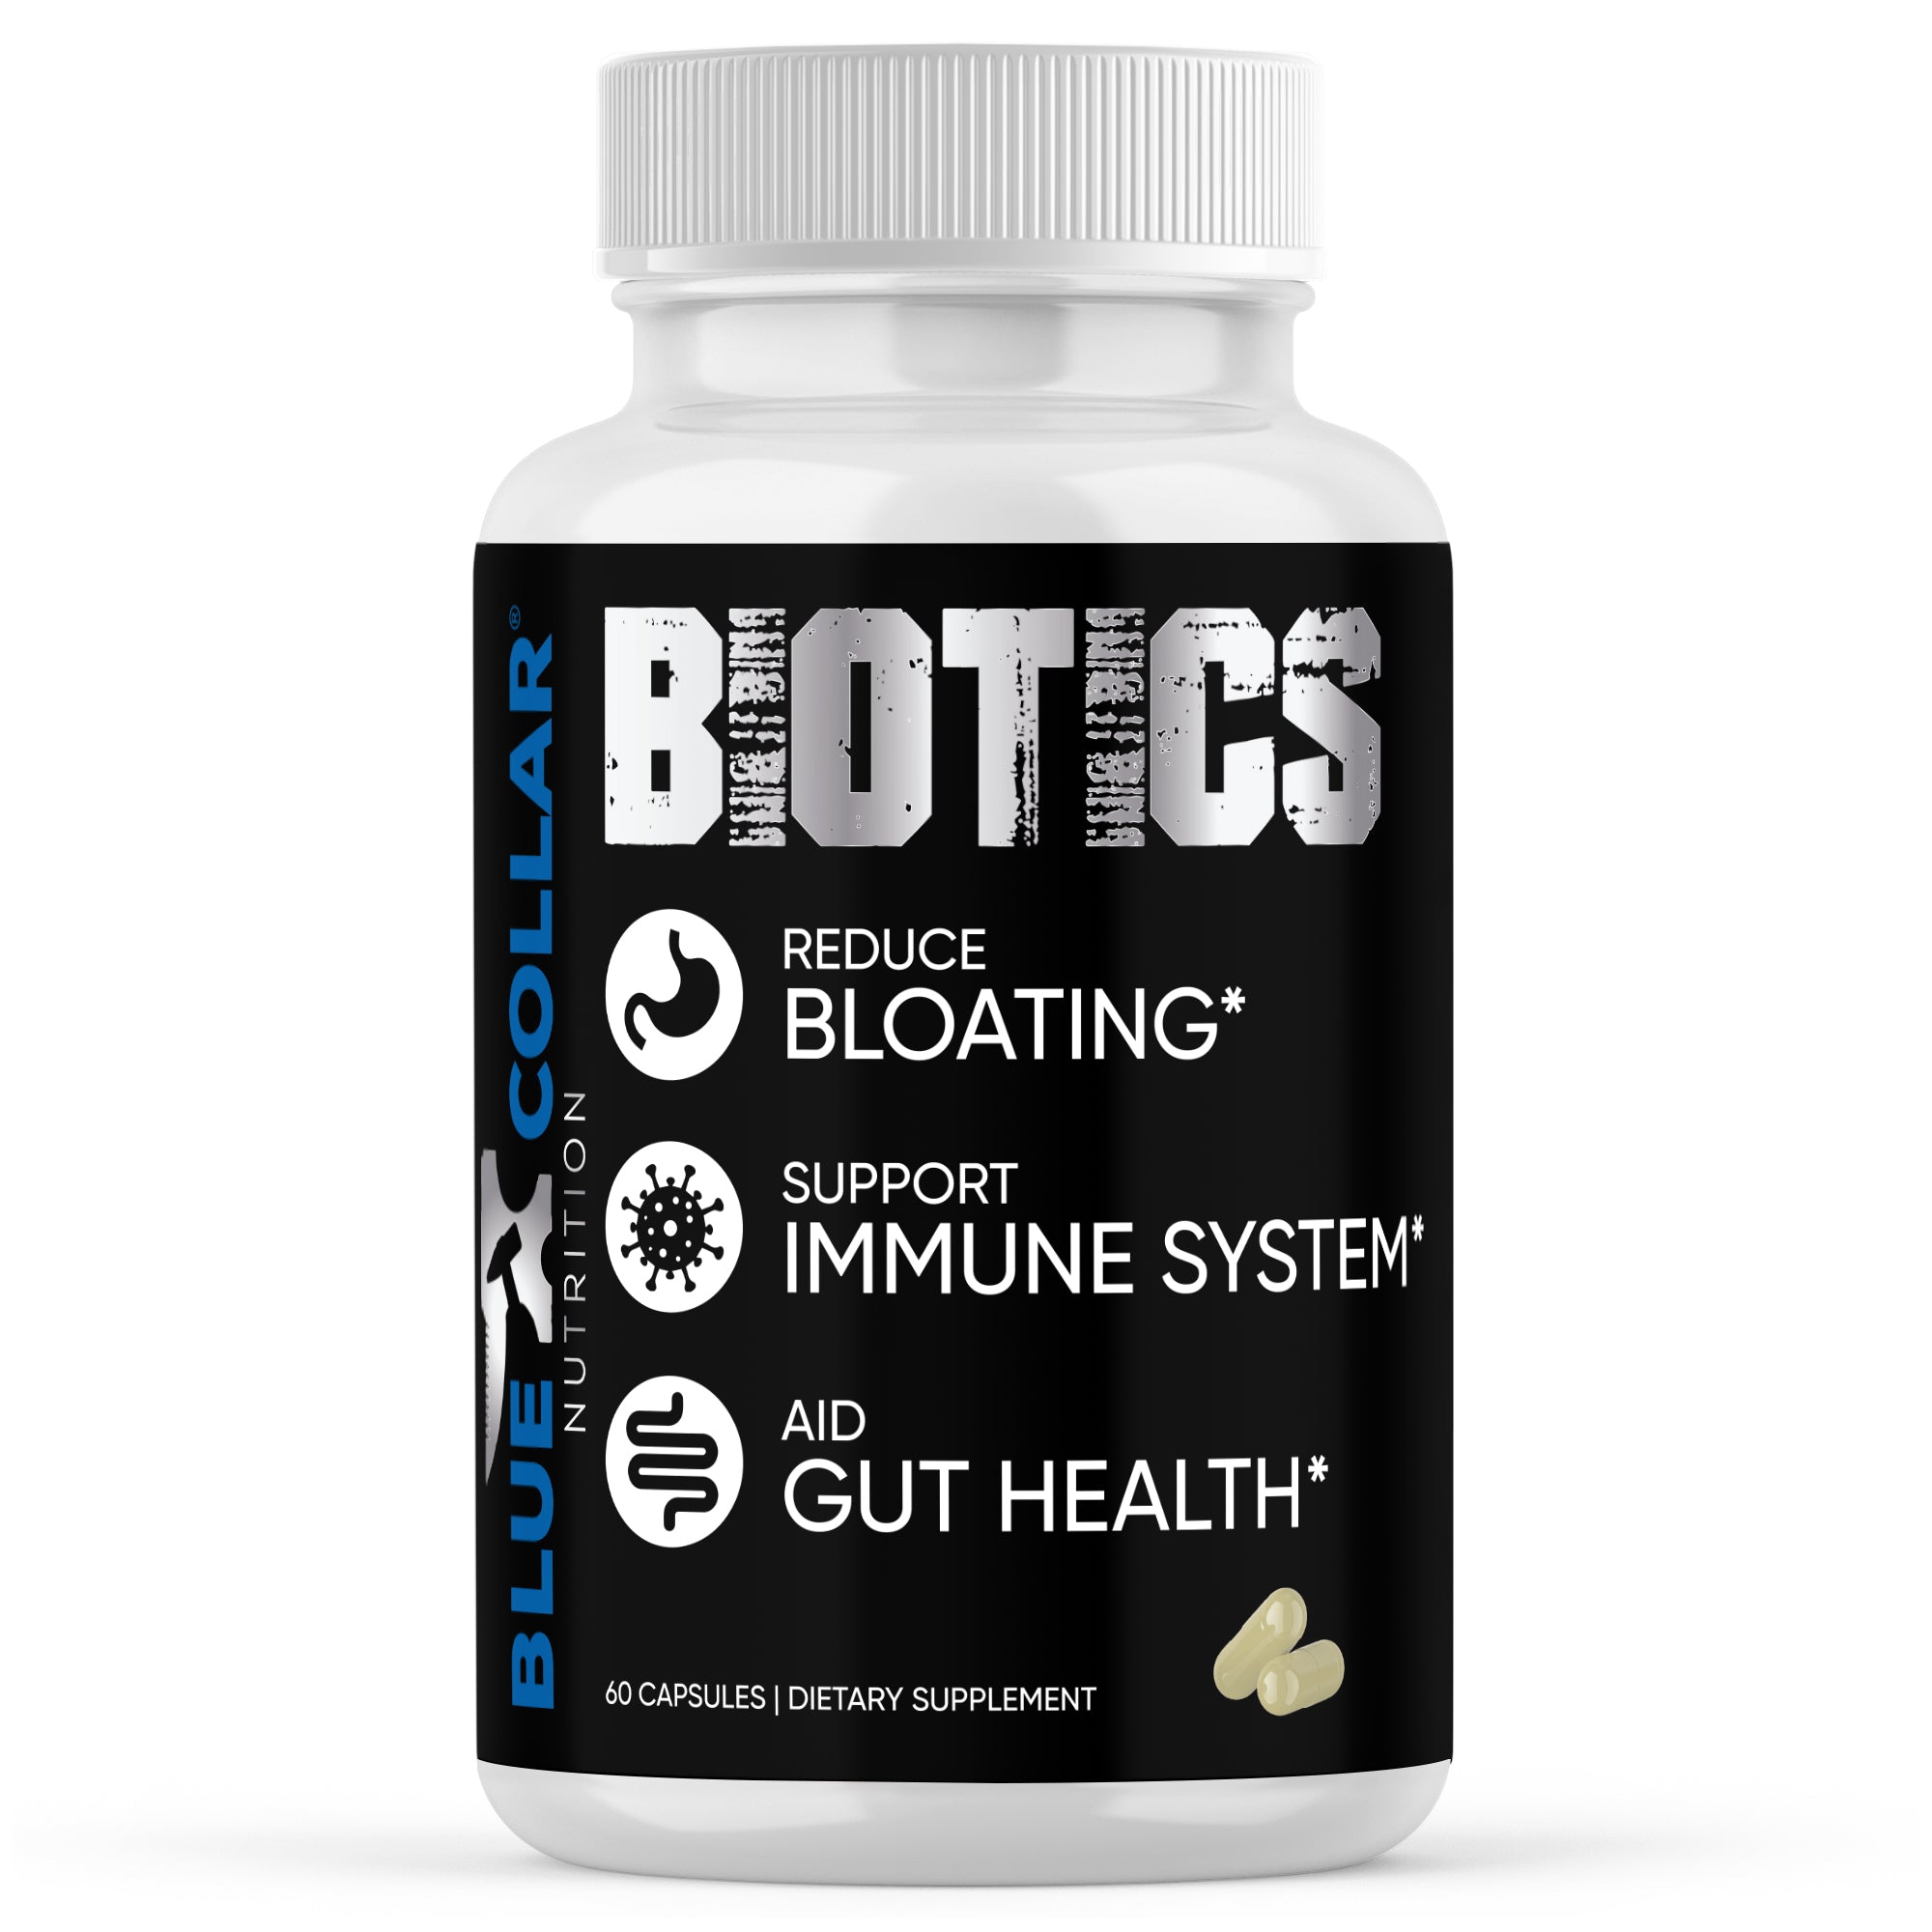 Biotics-supplements for blue collar workers-Blue Collar Nutrition